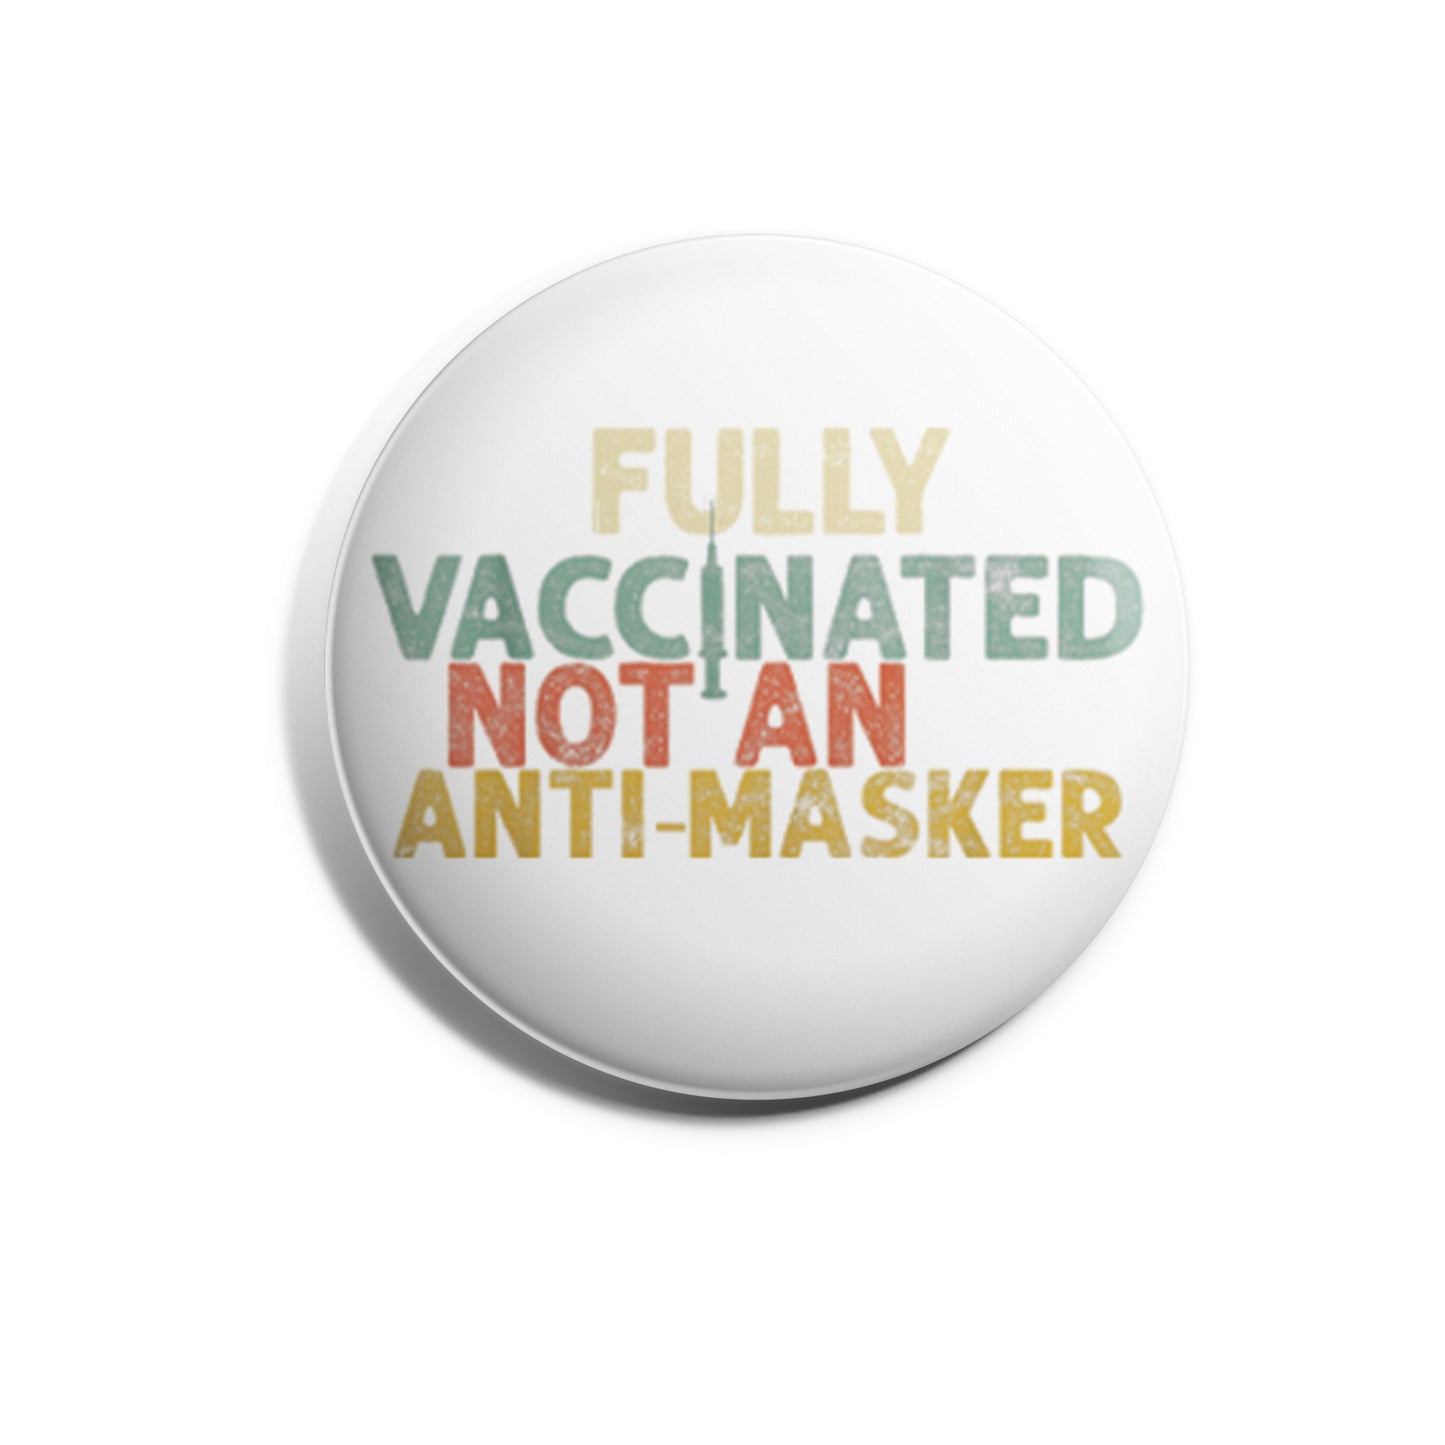 Fully Vaccinated, Not Anti